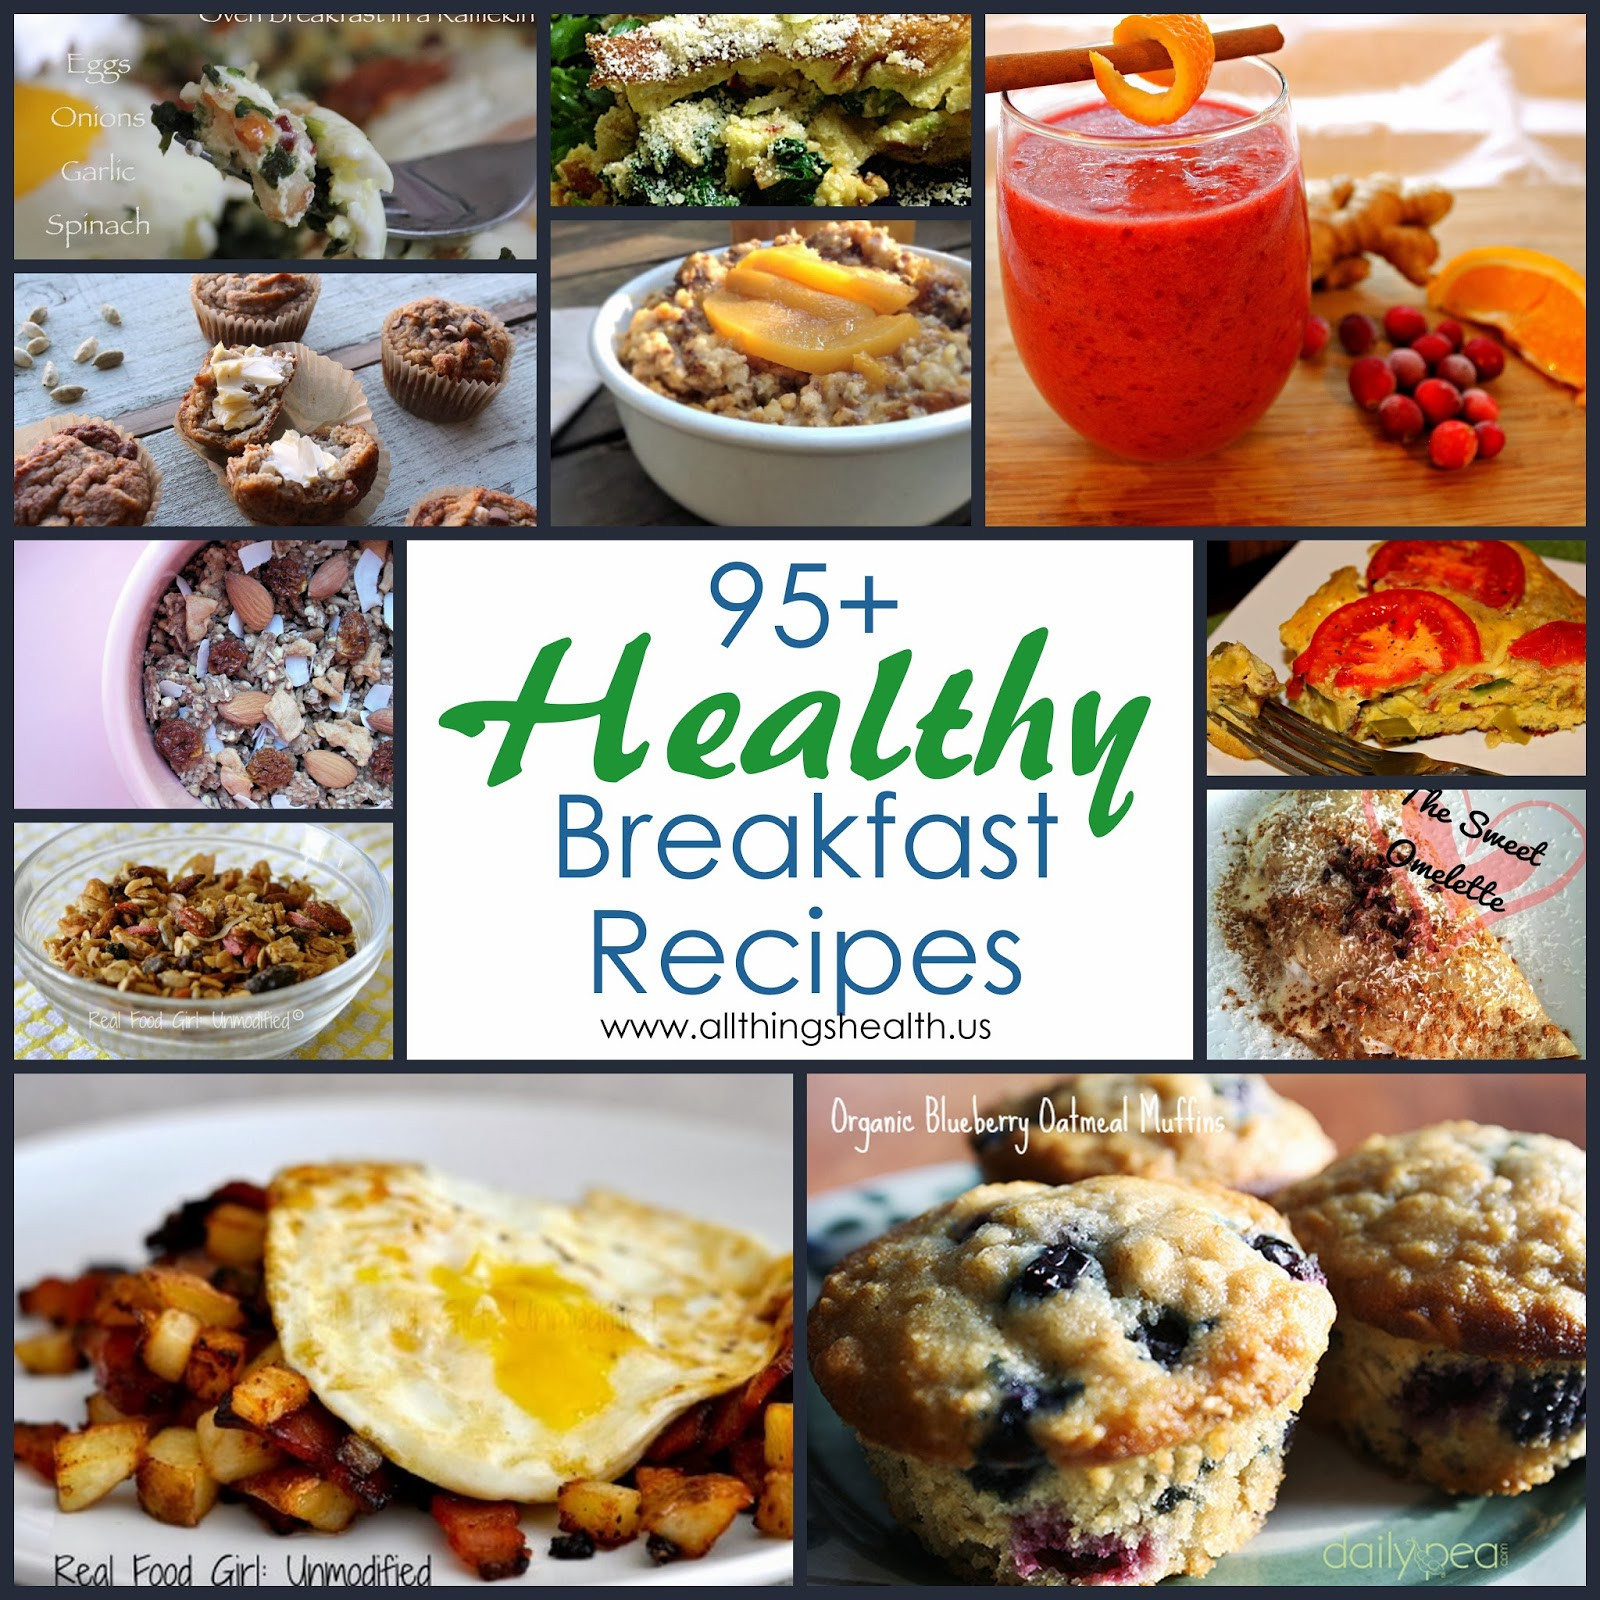 Good Healthy Breakfast Recipes
 All Things Health 95 Healthy Breakfast Recipes